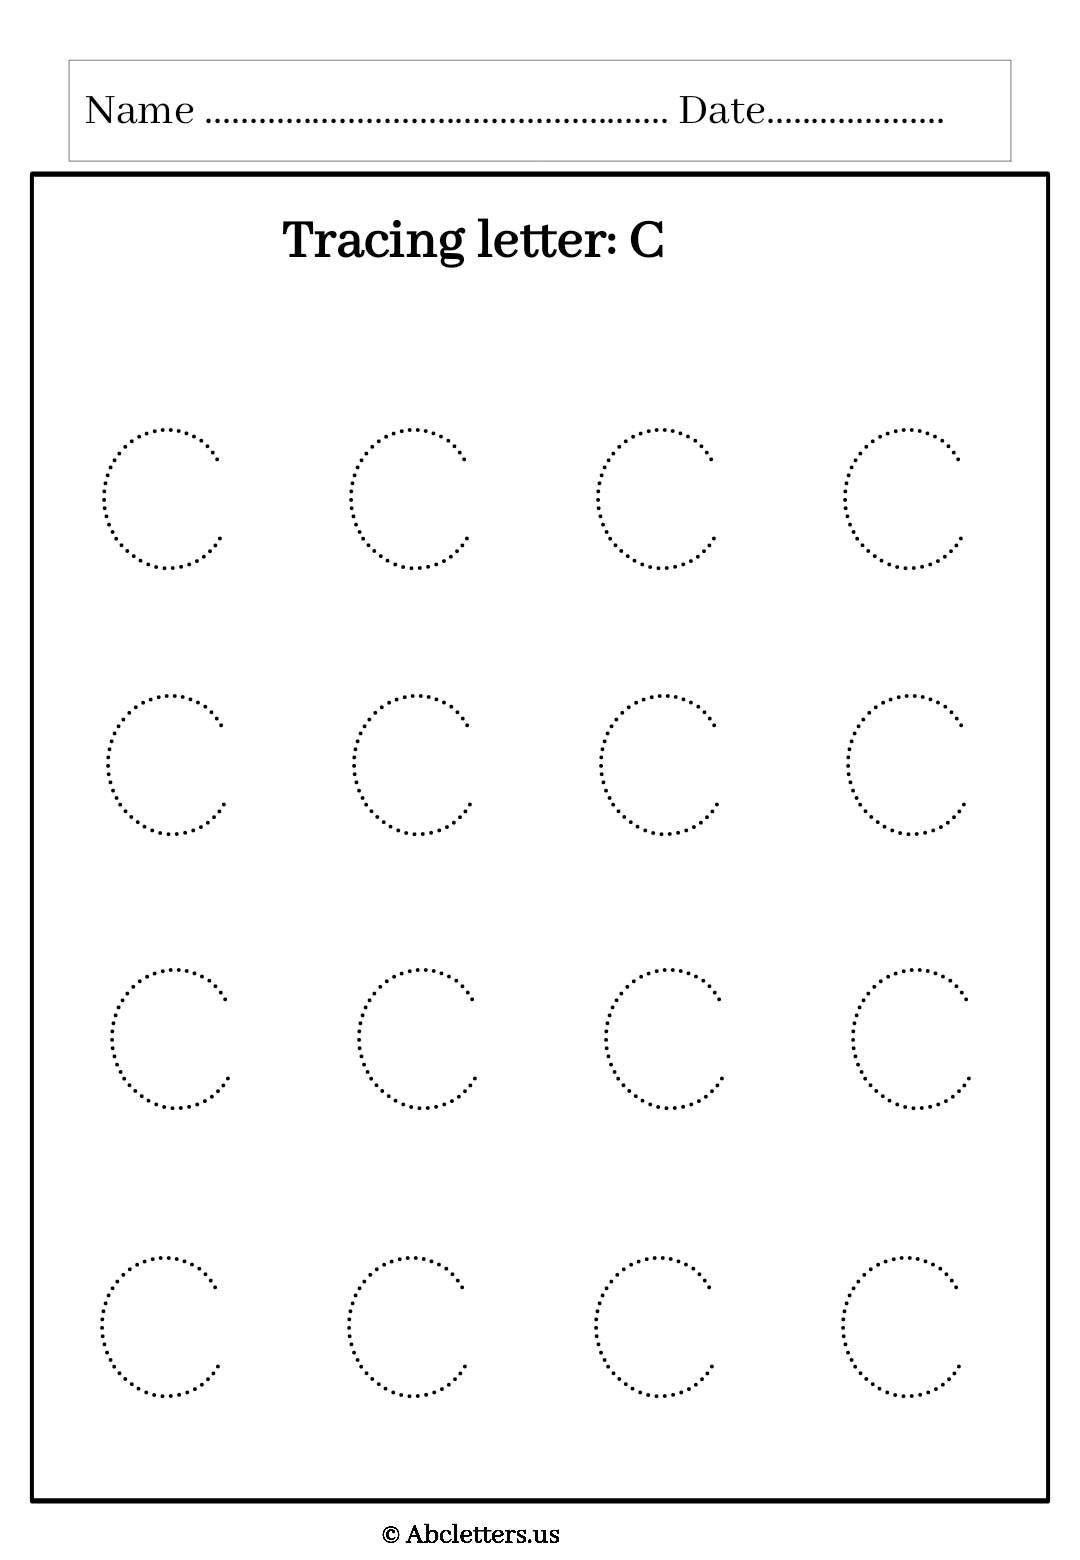 Tracing letter uppercase C